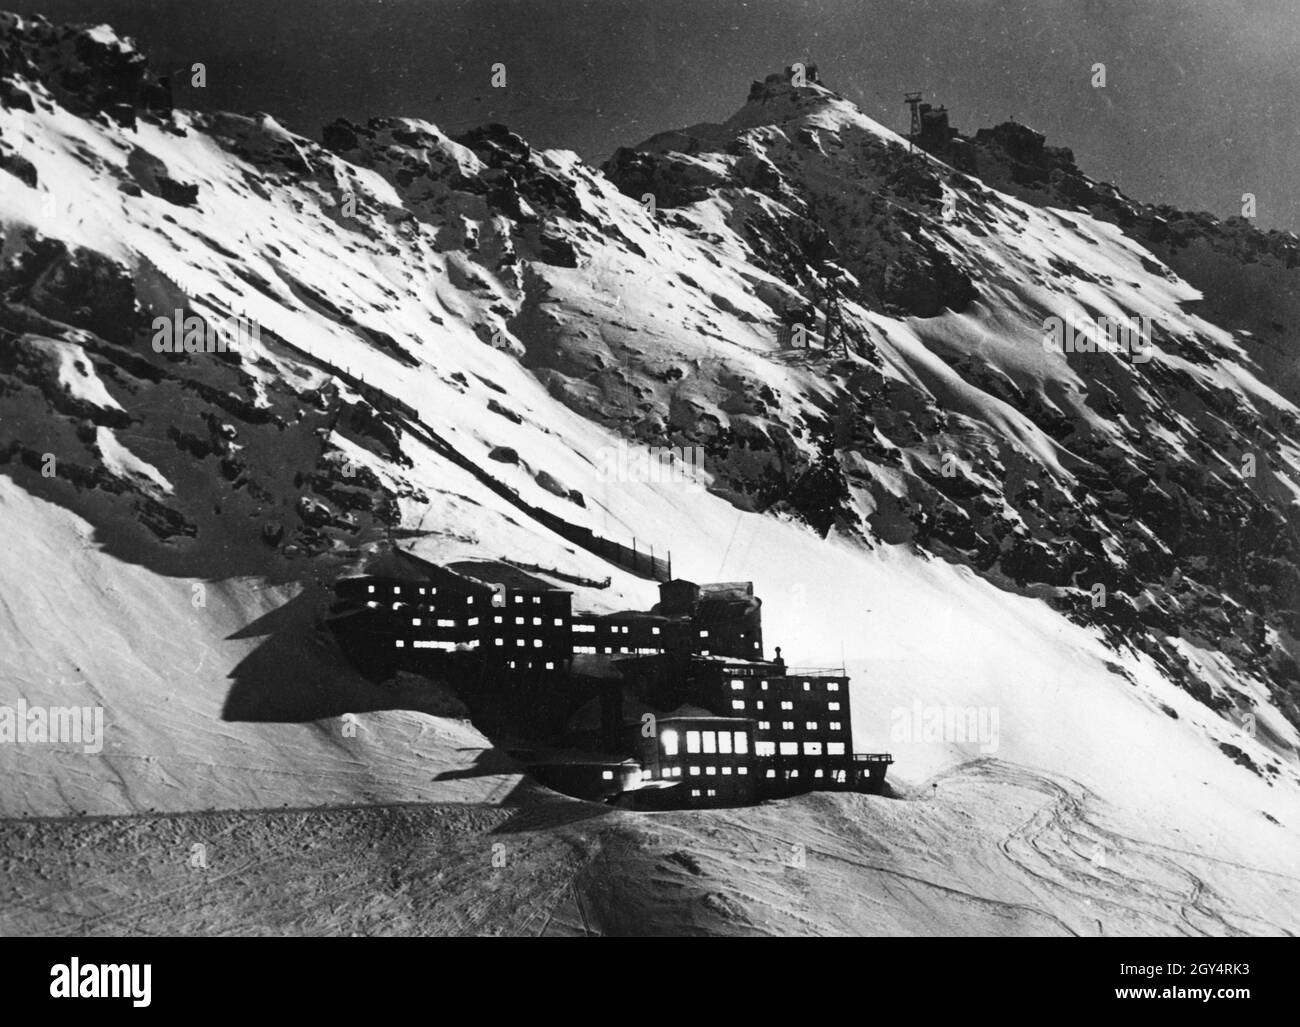 The Schneefernerhaus below the Zugspitze peak is situated with brightly lit windows in the middle of the wild snow and rock landscape, which is illuminated by pale moonlight at night. The house is connected to the summit by cable car. Ski tracks lead downhill from the house. The photograph was taken on 2 November 1934 [automated translation] Stock Photo